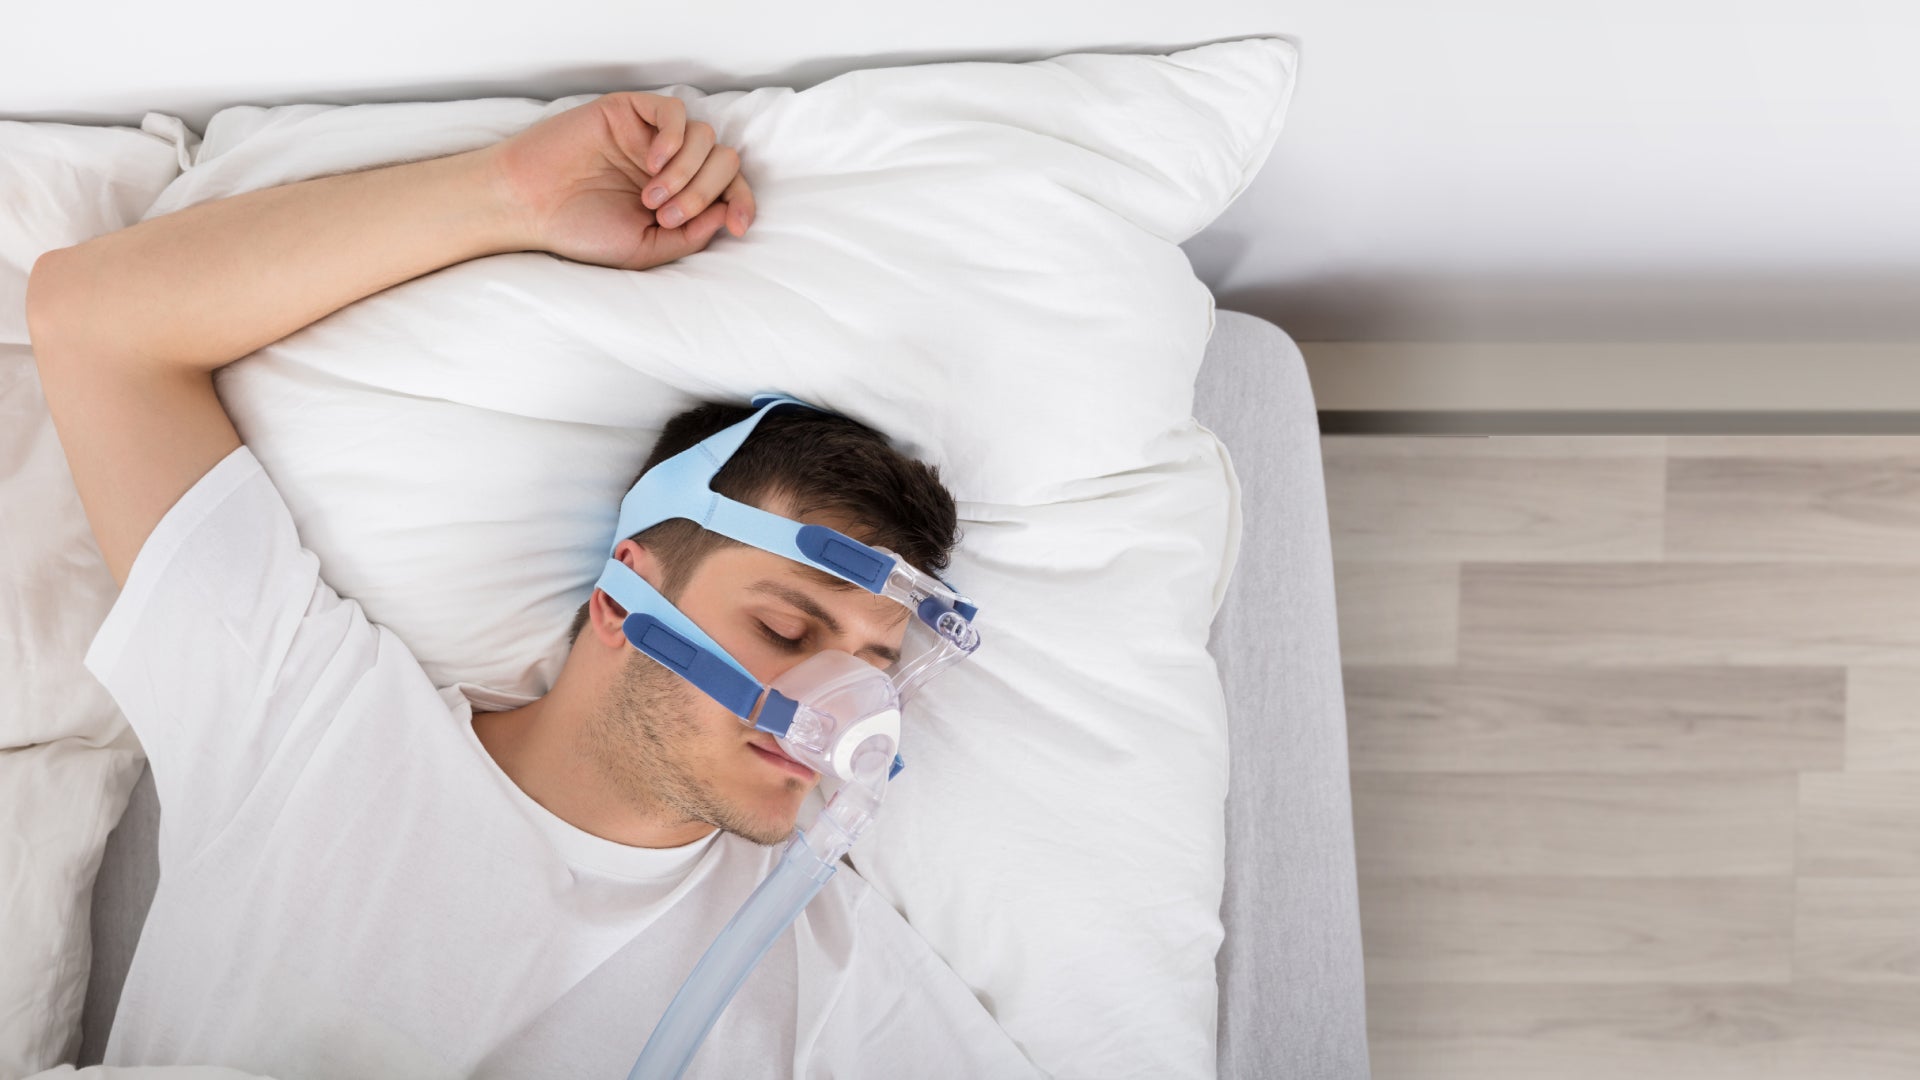 How to Stop Snoring: What are the top Cures for Snoring?